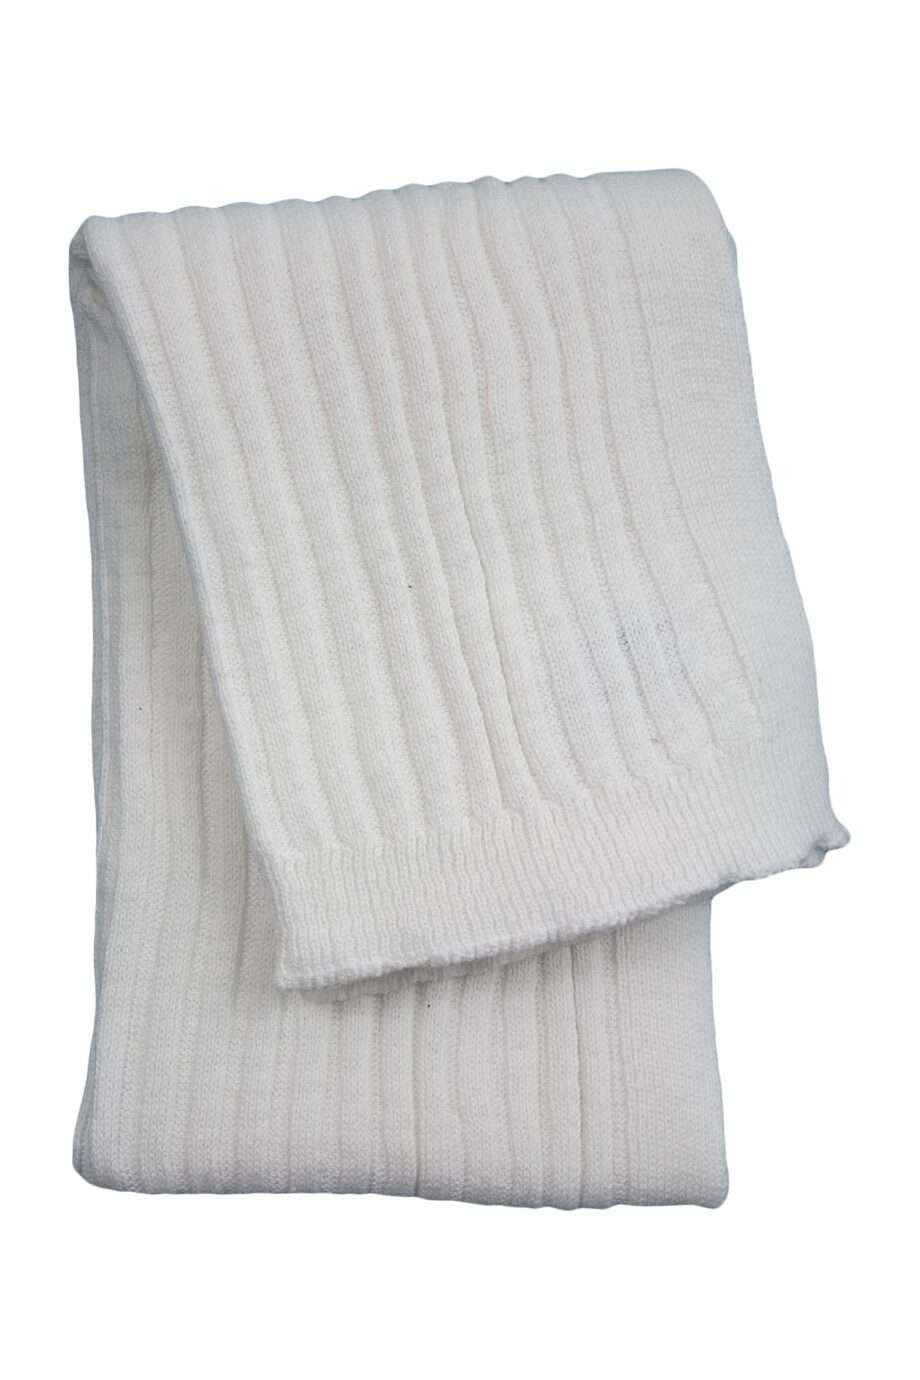 ribs small white knitted cotton little blanket medium